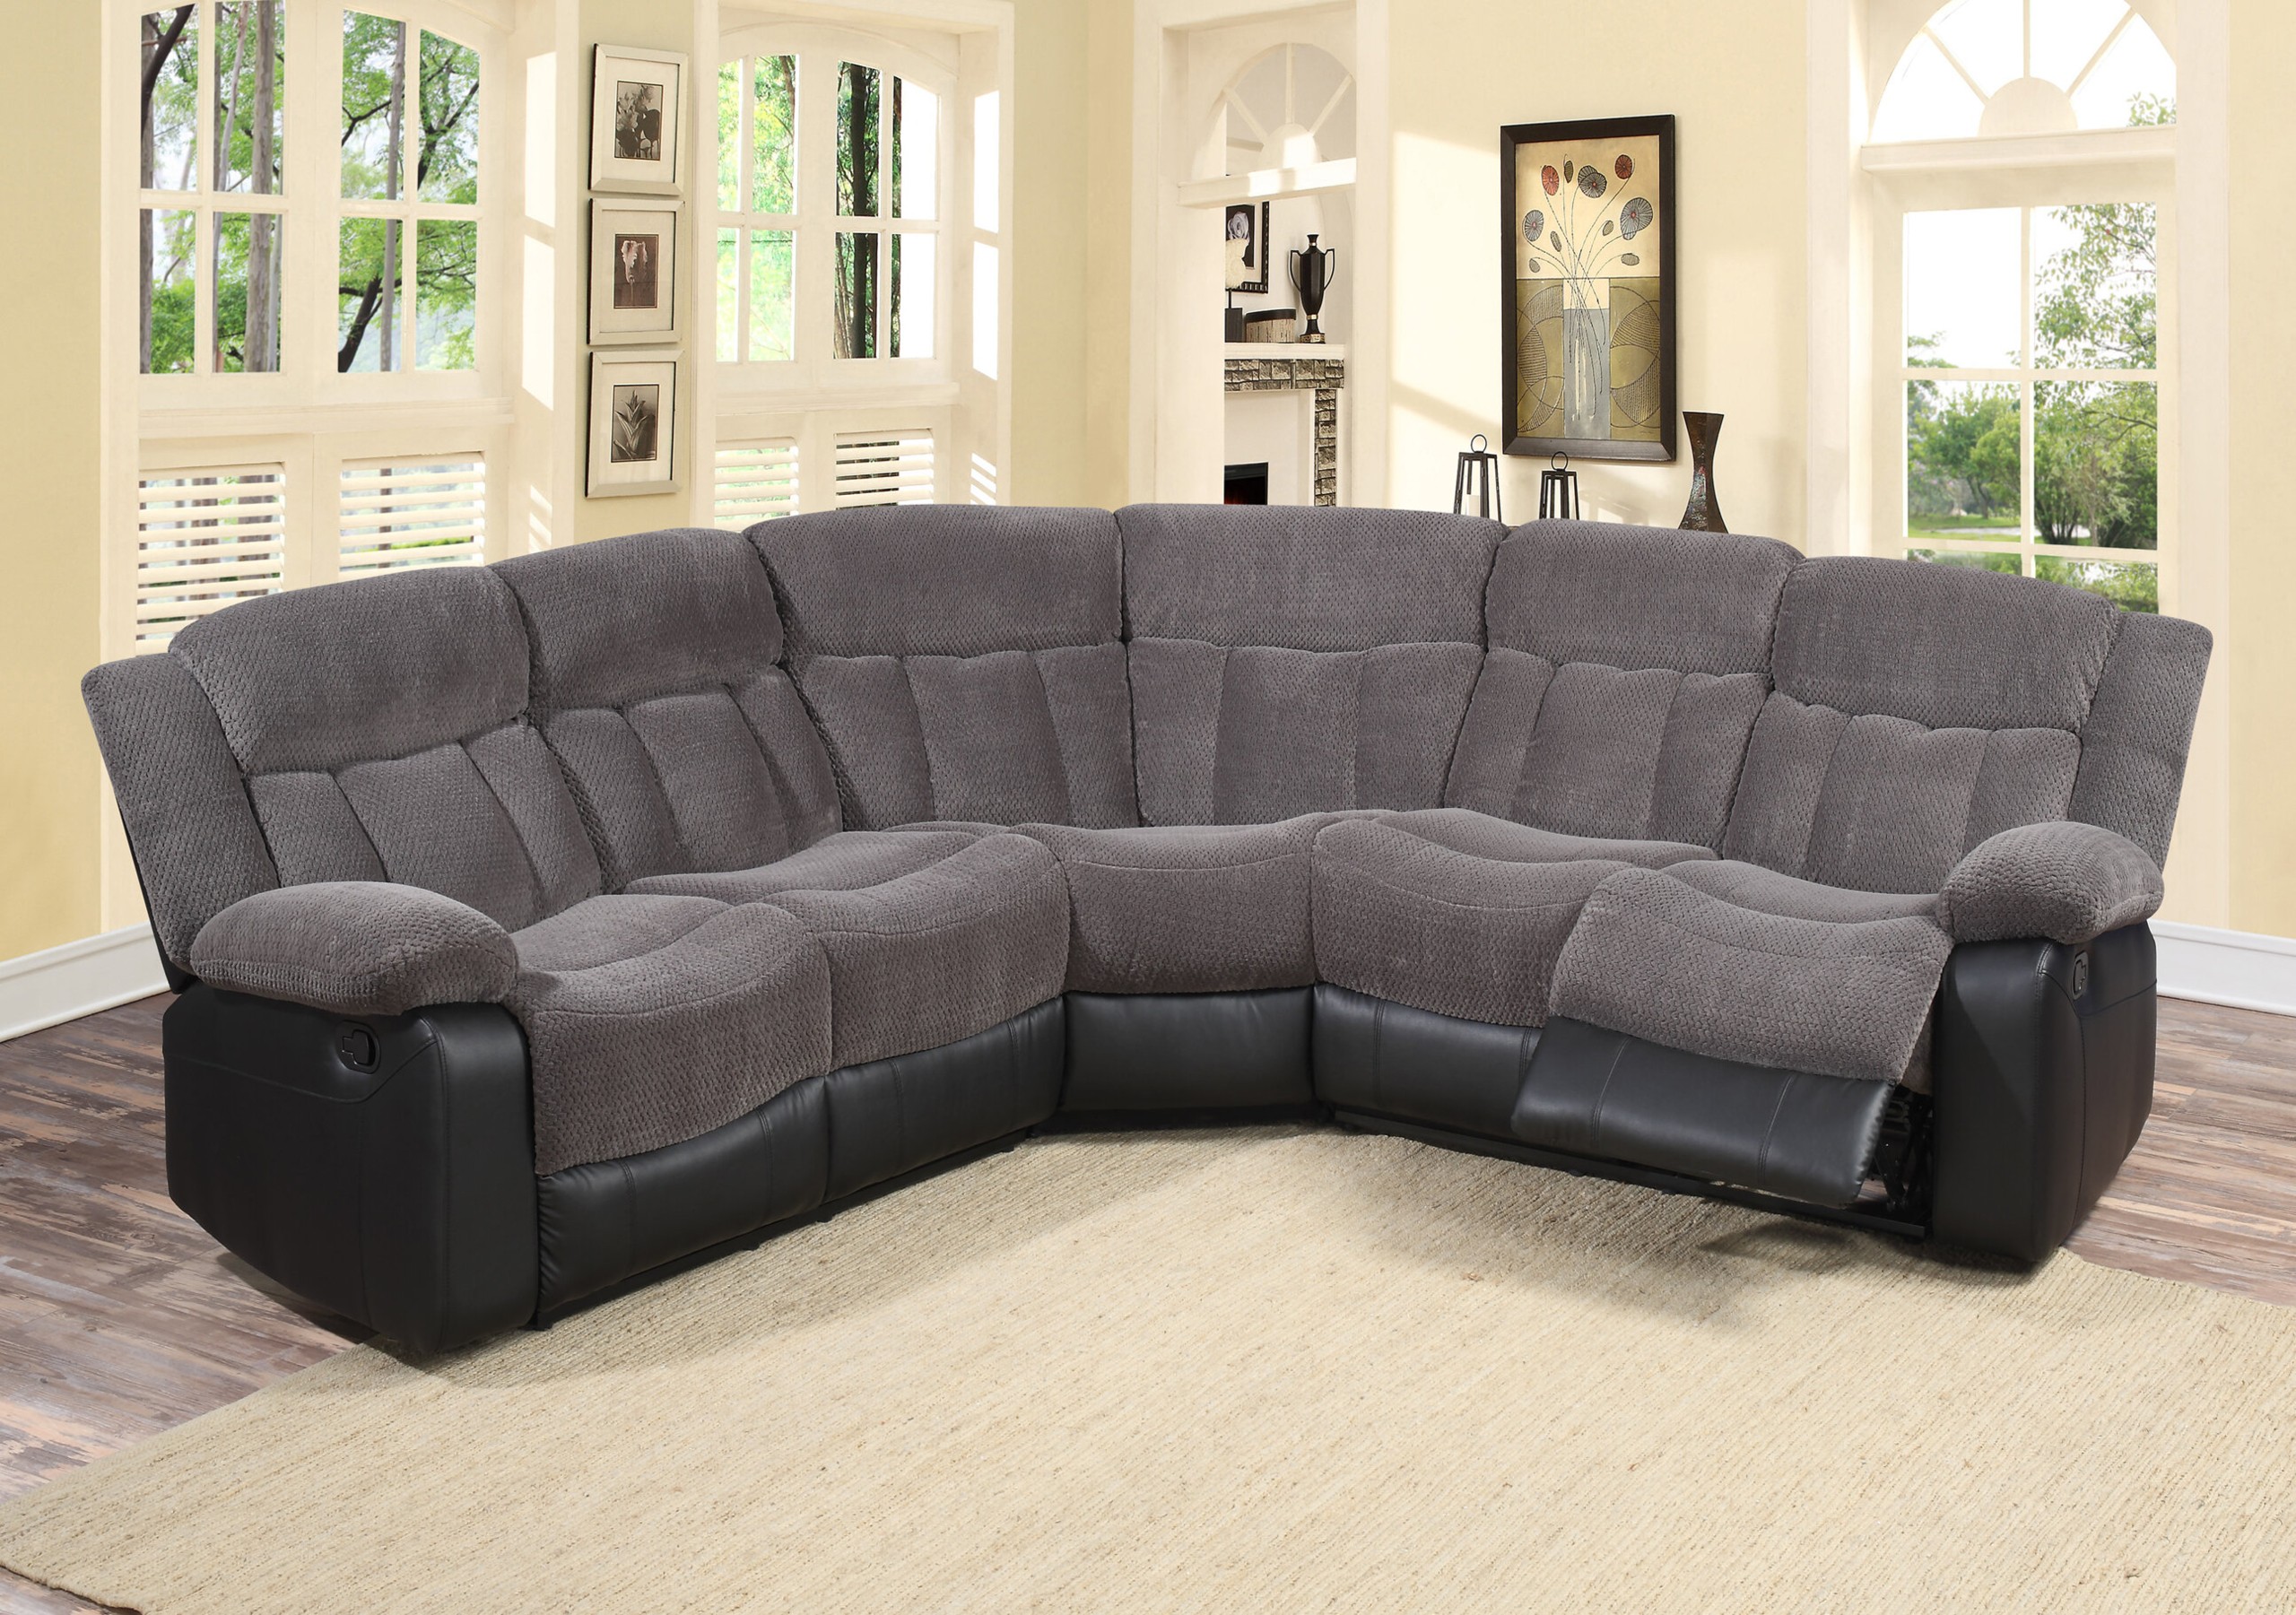 Dark Leather Rounded Sectional 